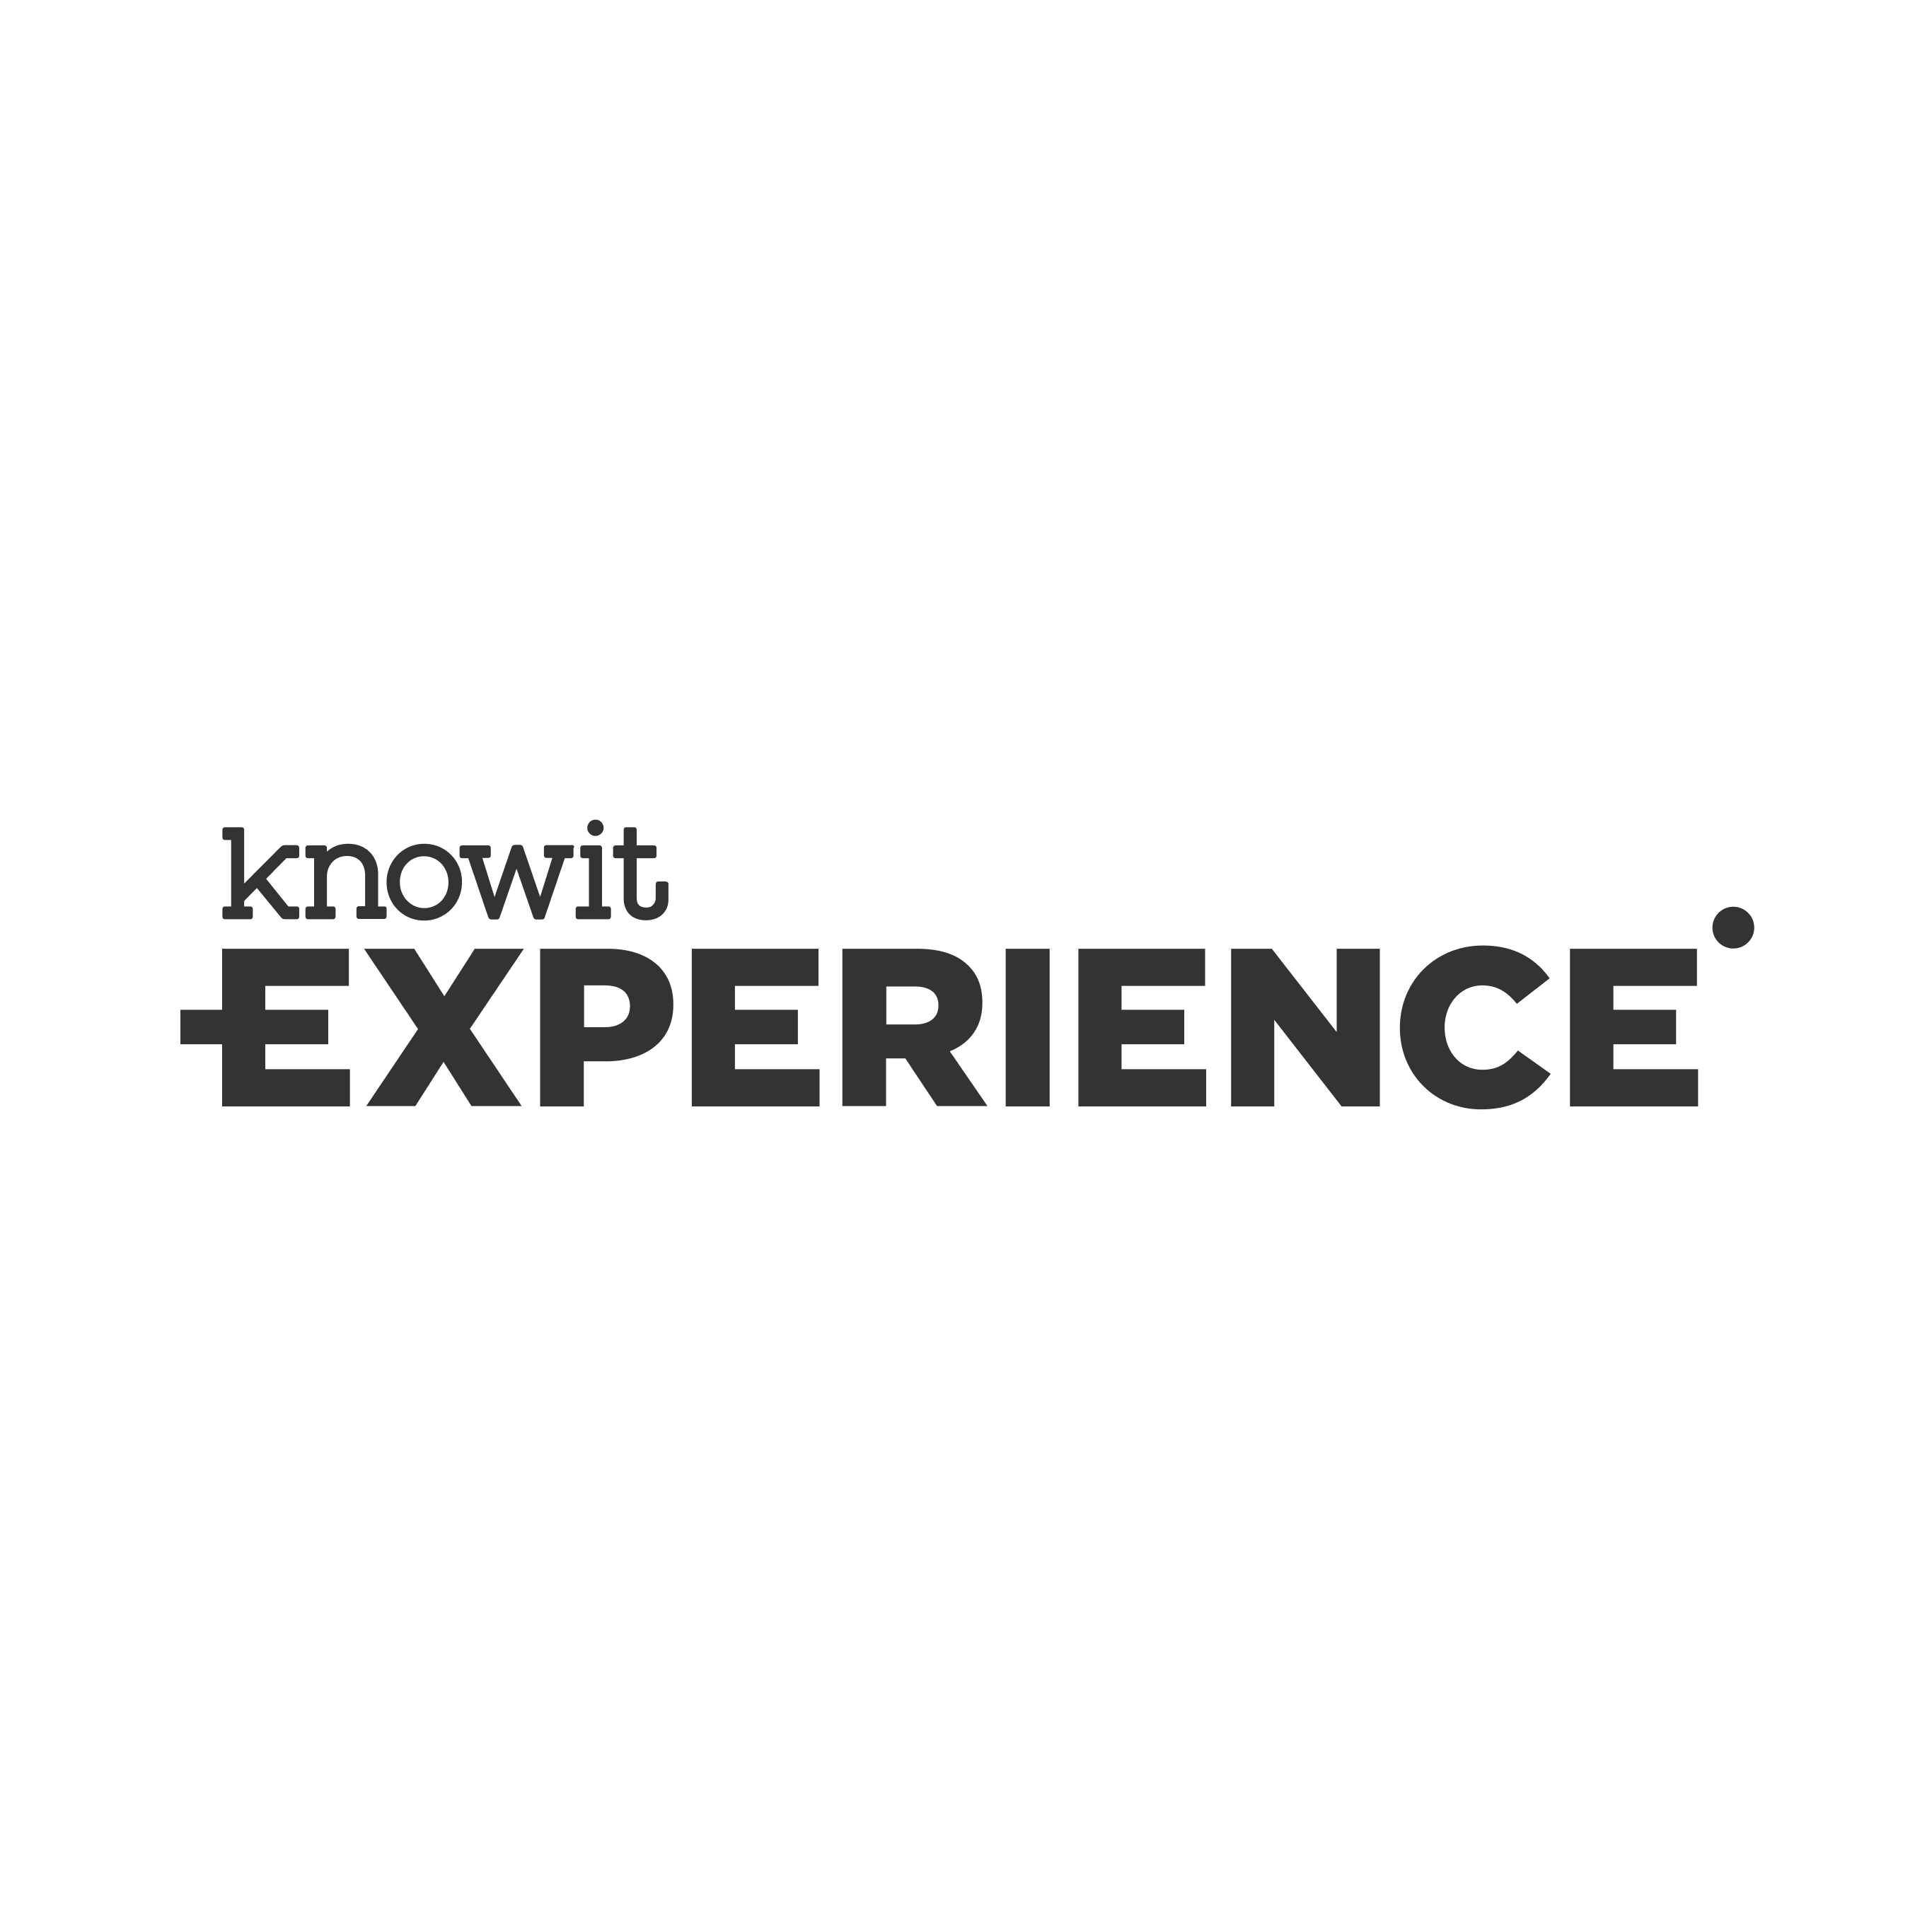 a black and white logo for knowit experience